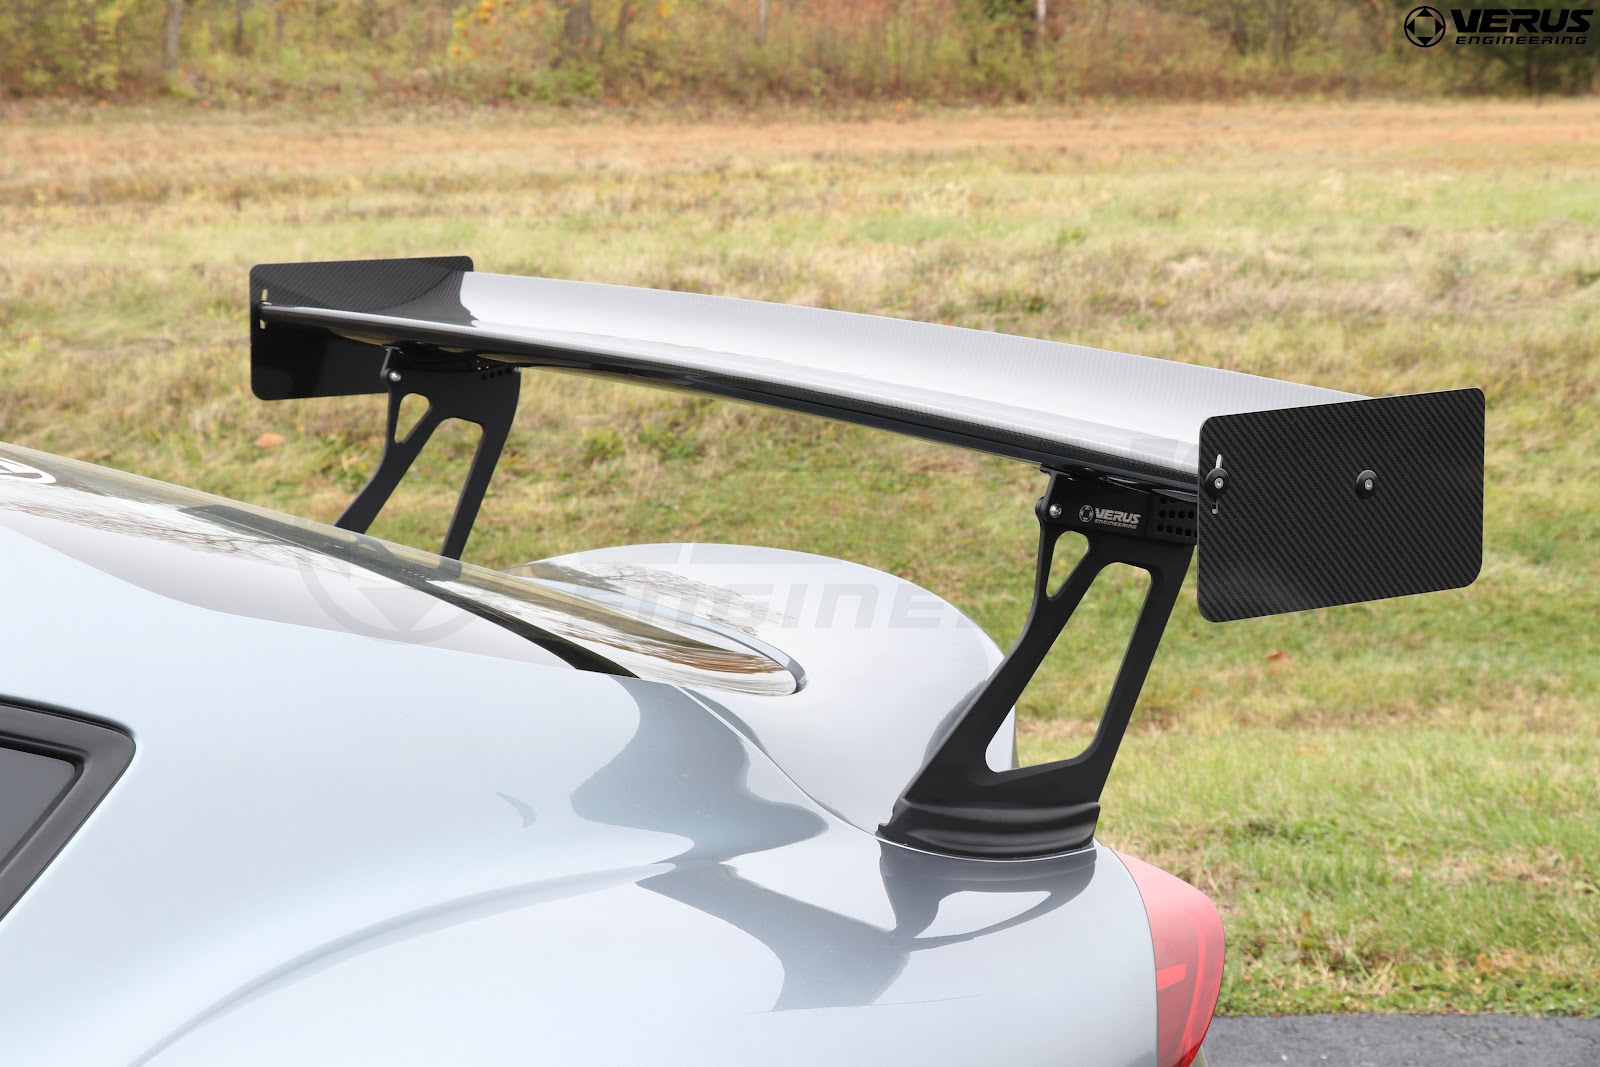 Toyota Supra aftermarket rear wing from Verus Engineering